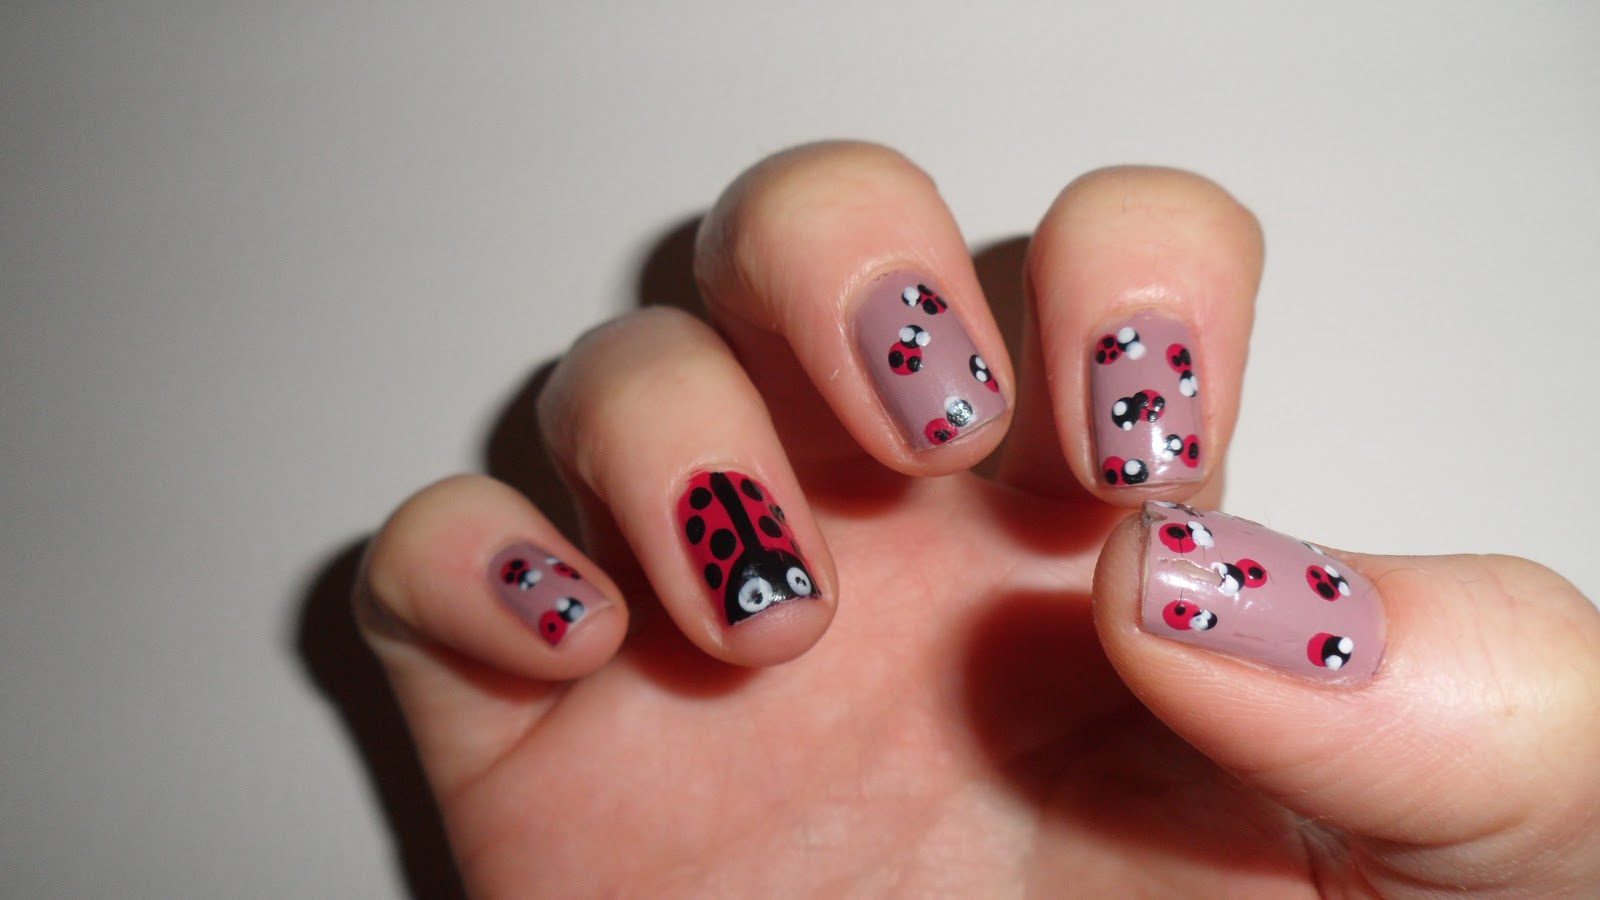 2. DIY Ladybug Nail Art with Movable Wings - wide 1